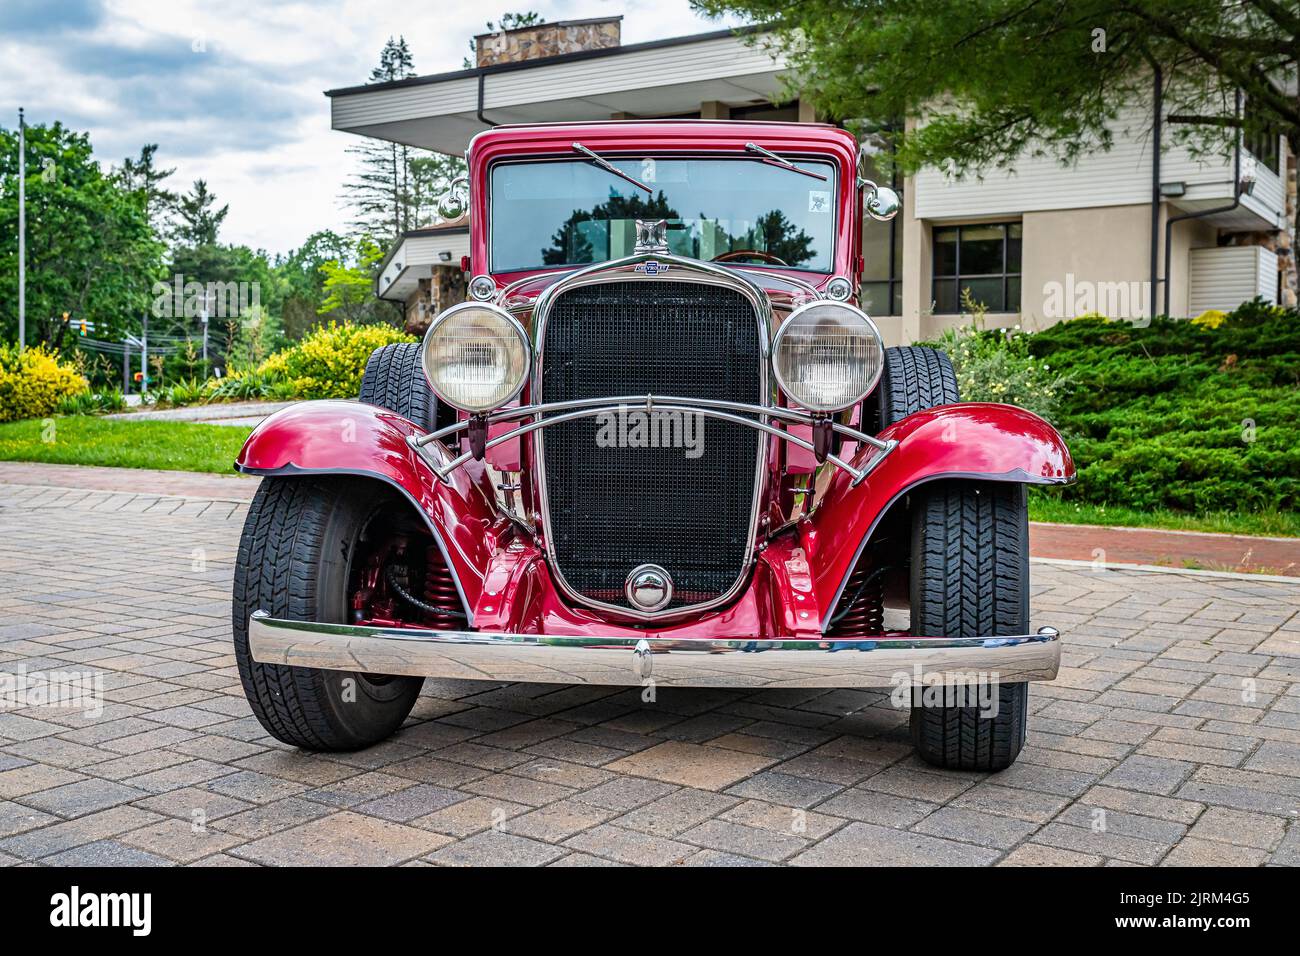 Highlands, NC - June 10, 2022: Low perspective front view of a 1932 Chevrolet Rumble Seat Coupe at a local car show. Stock Photo